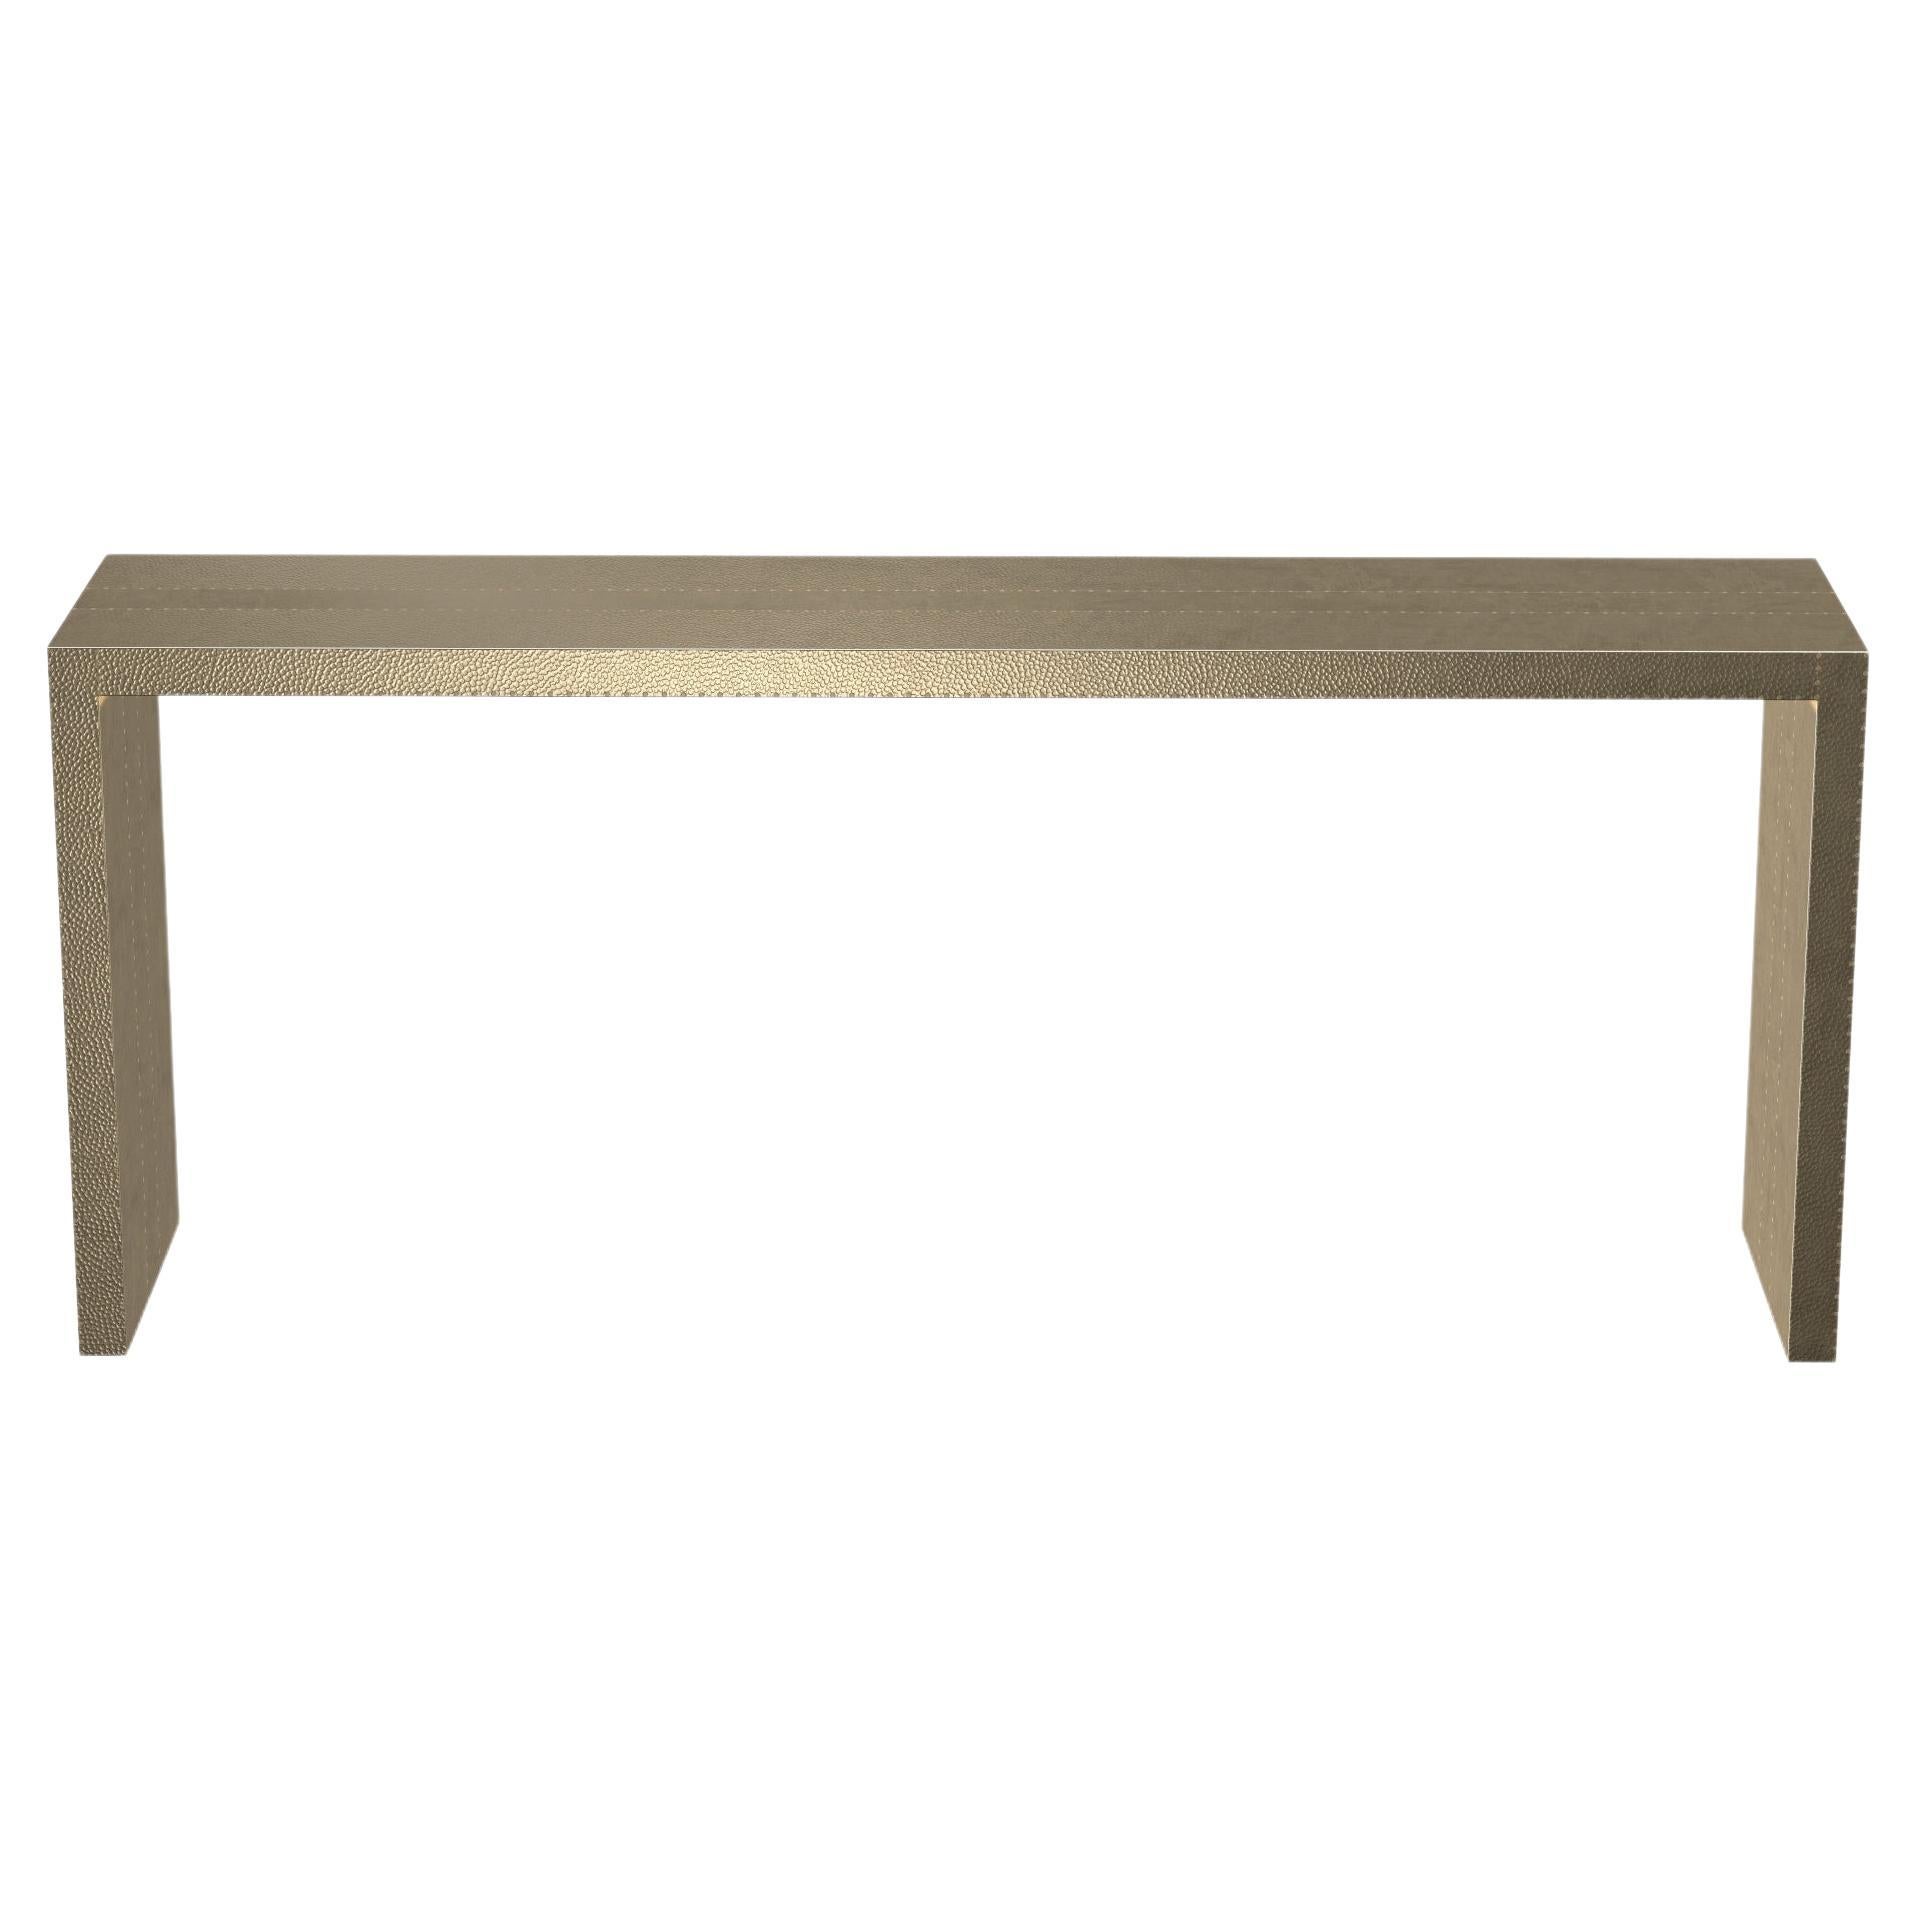 Art Deco Card Tables and Tea Console Tables Mid. Hammered in Brass  by Alison S For Sale